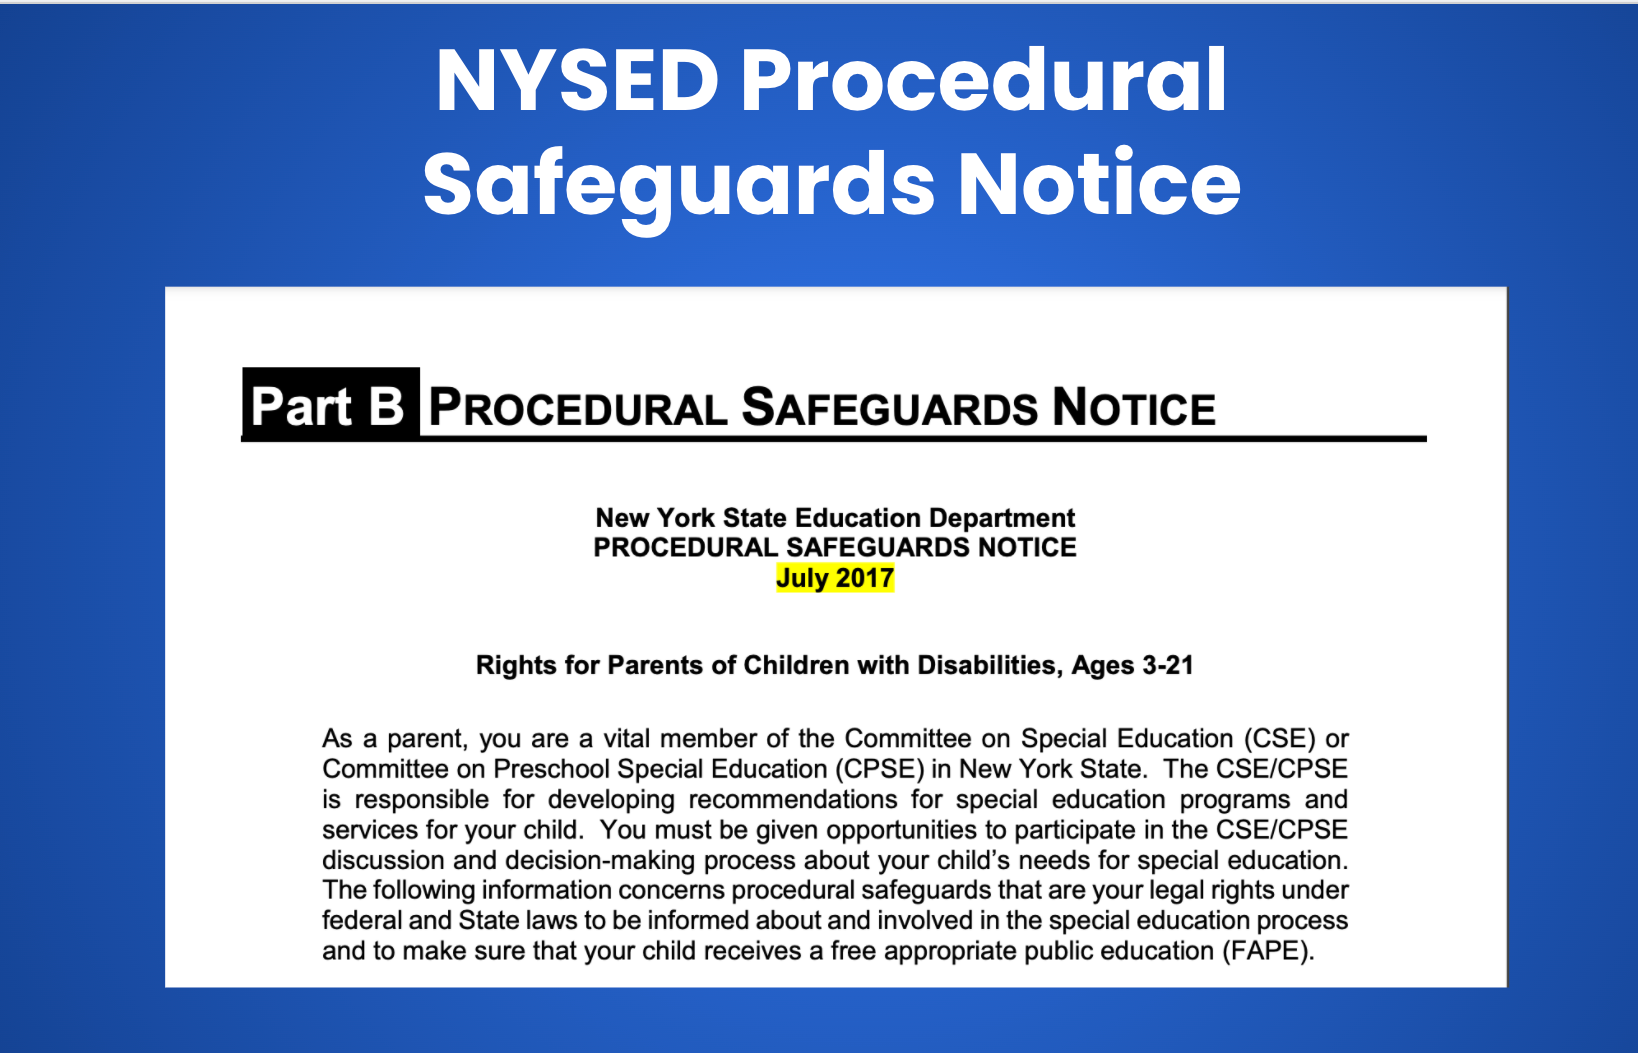 NYSED Procedural Safeguards Document